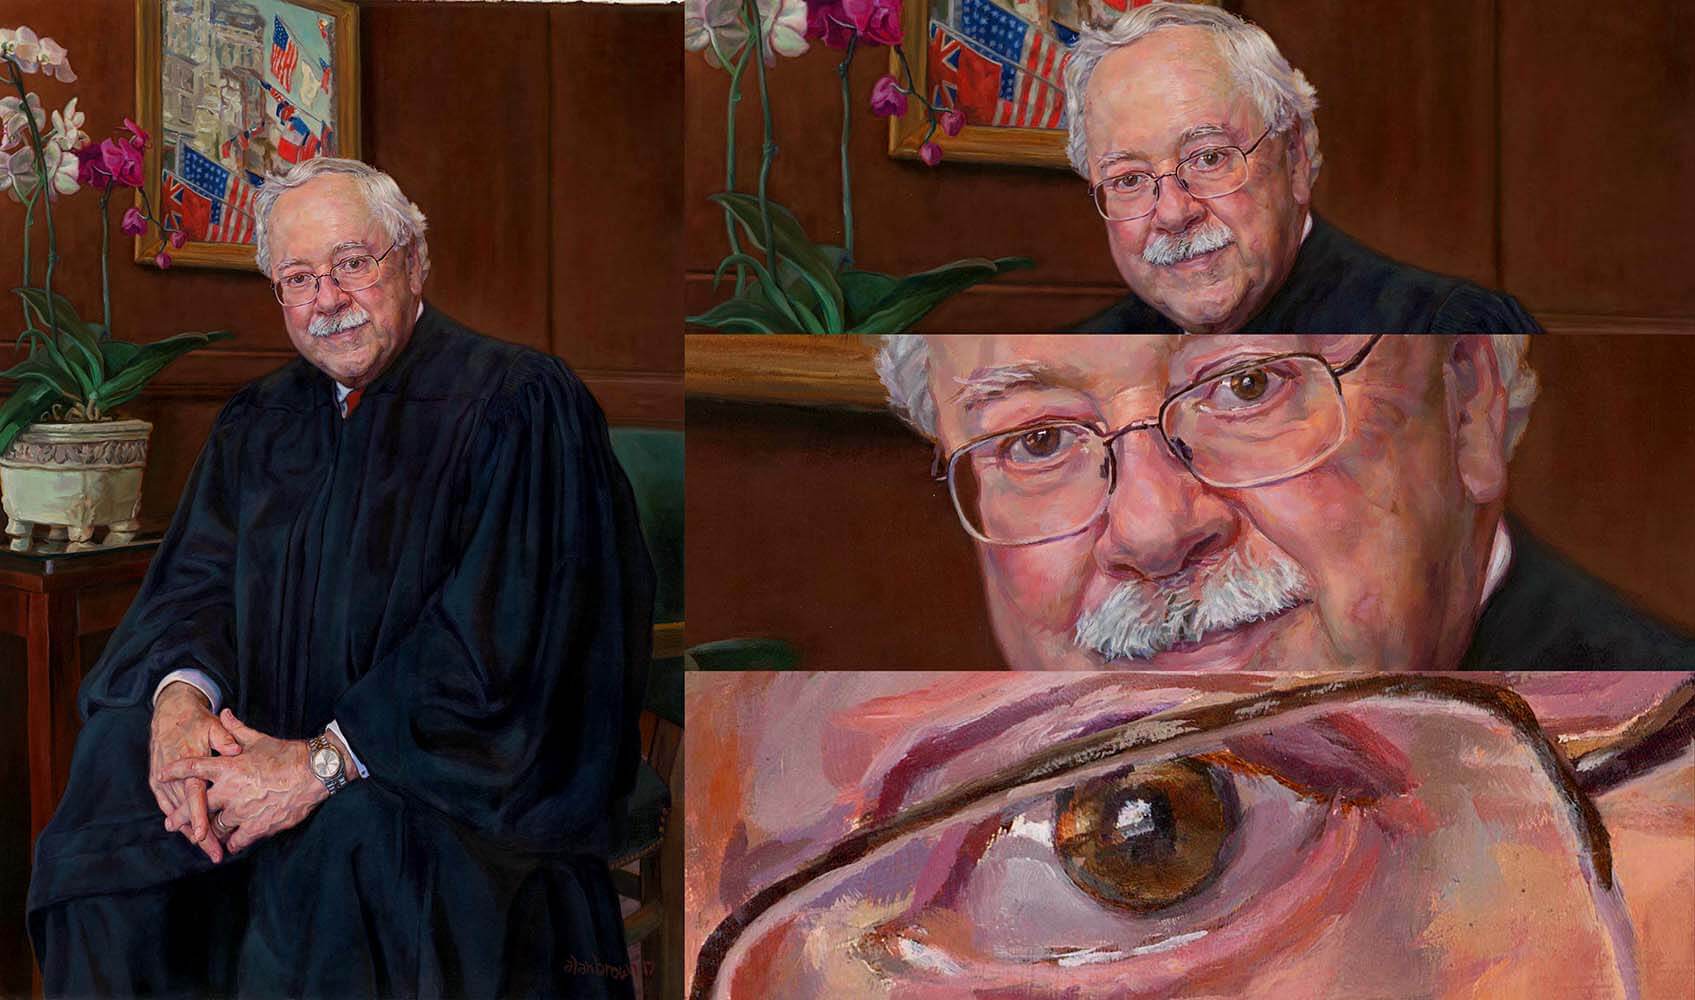 Artist Alan Brown portrait of a Judge scanned by Chica Prints on a large flatbed scanner